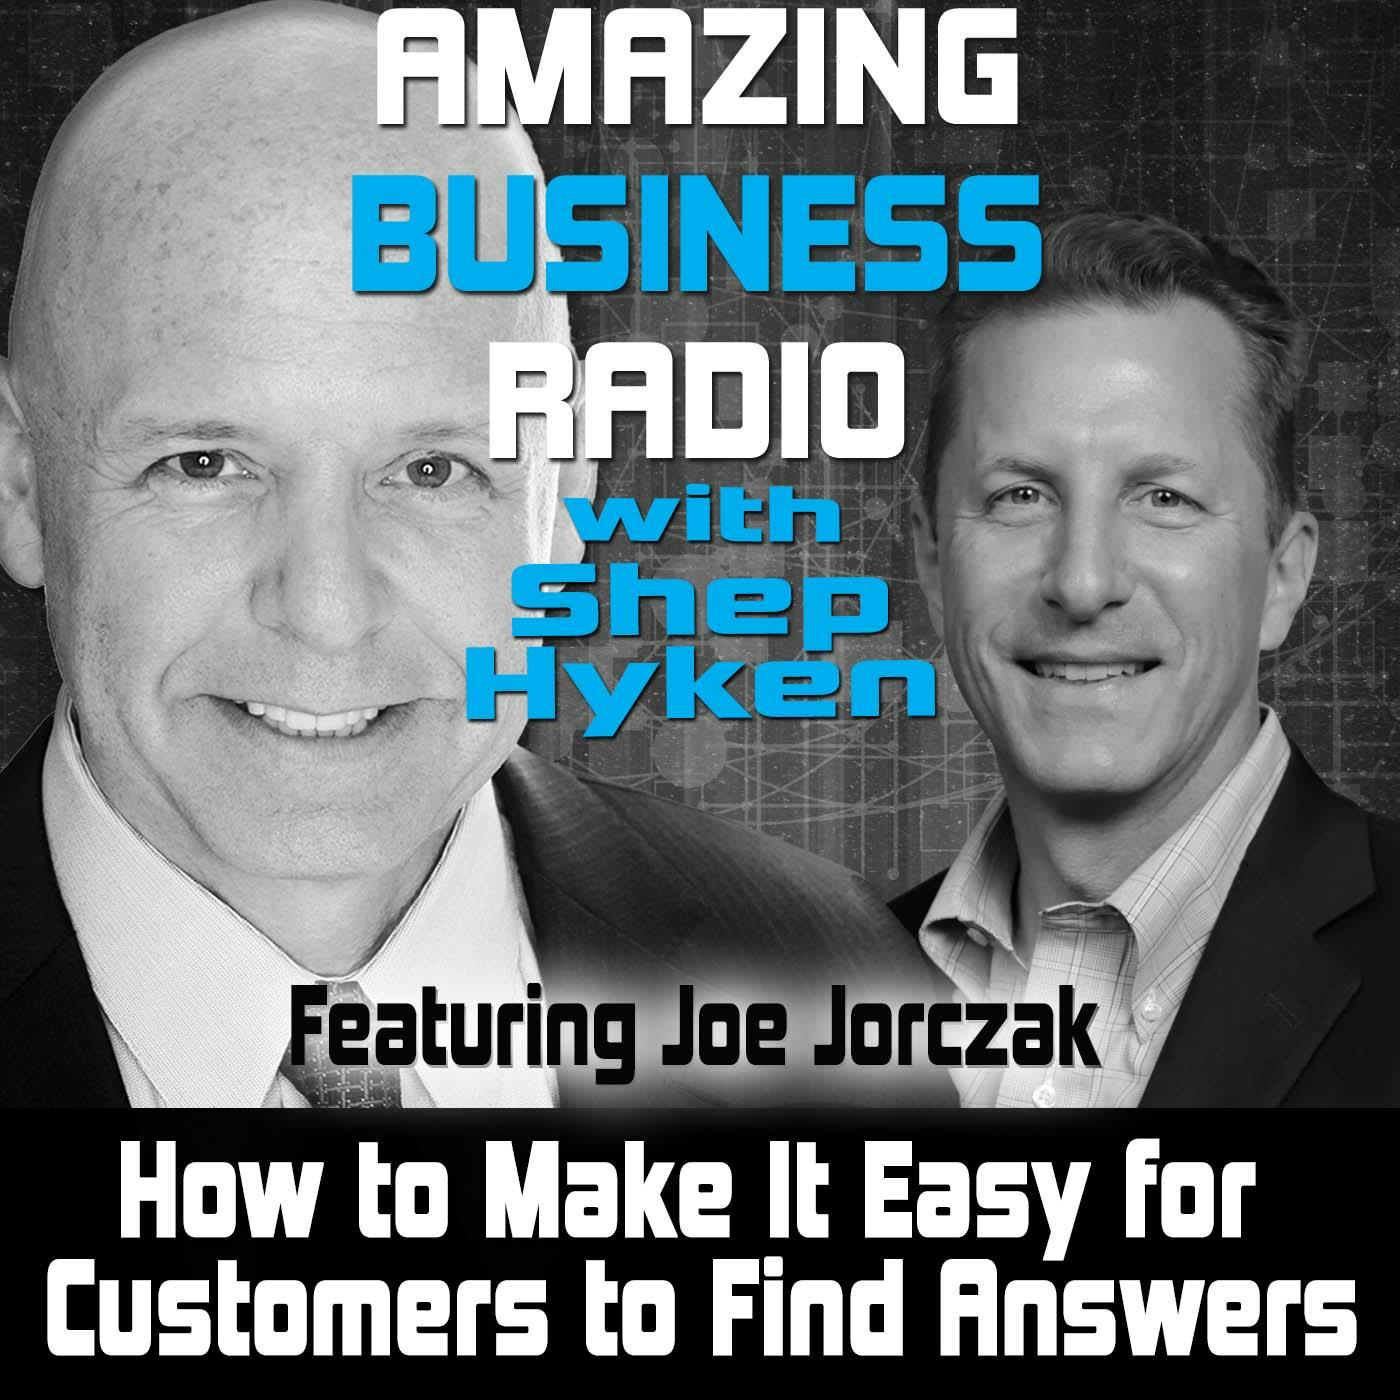 How to Make It Easy for Customers to Find Answers Featuring Joe Jorczak